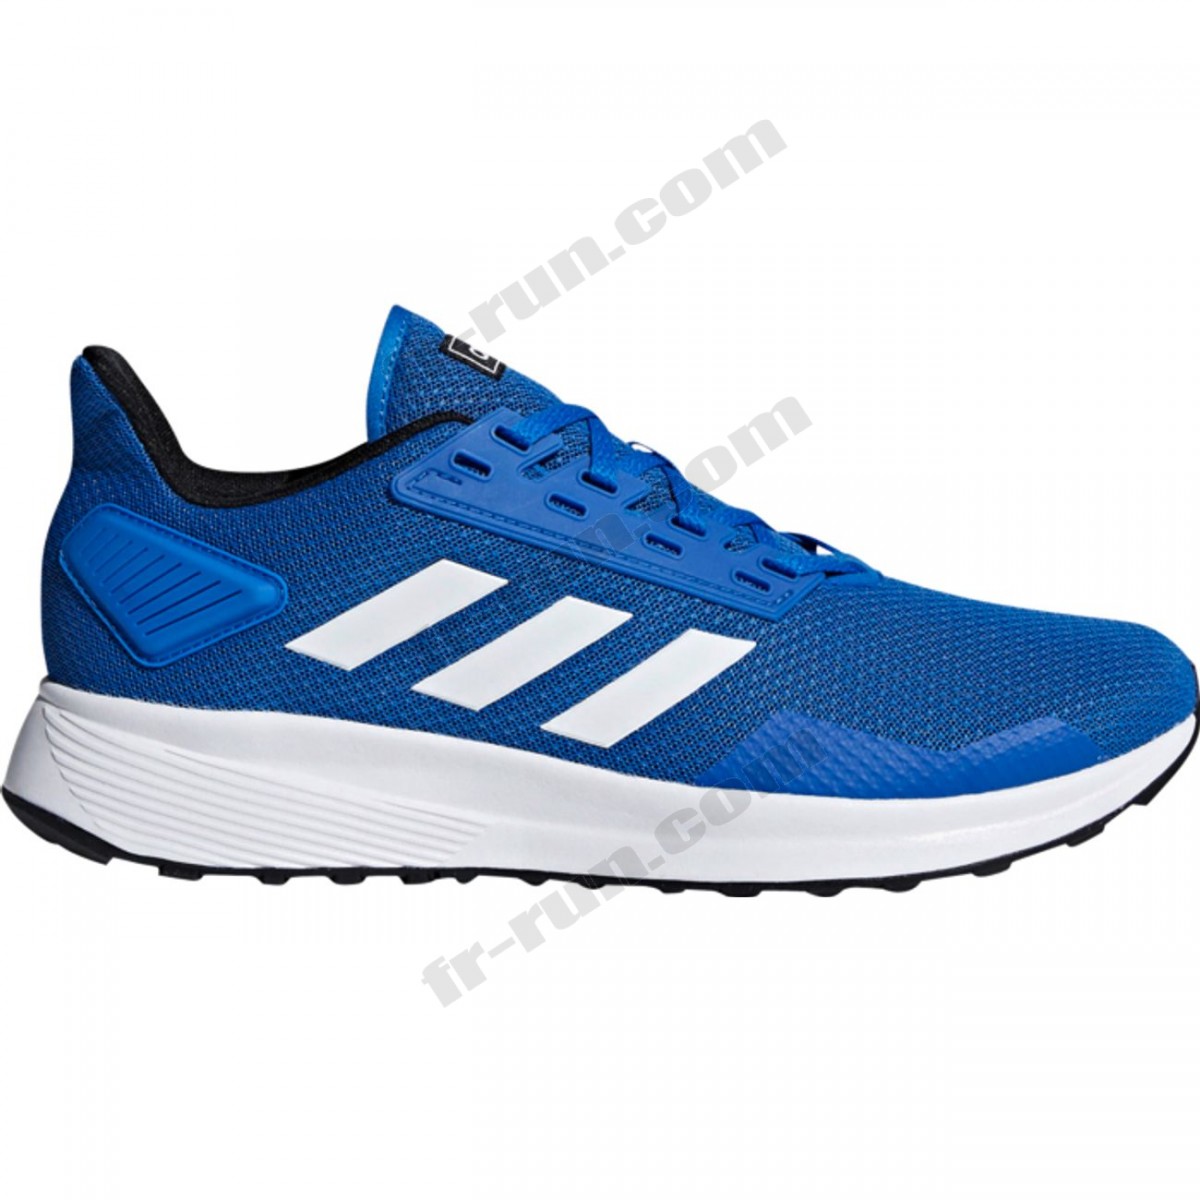 Adidas/CHAUSSURES BASSES running homme ADIDAS DURAMO 9 ◇◇◇ Pas Cher Du Tout - Adidas/CHAUSSURES BASSES running homme ADIDAS DURAMO 9 ◇◇◇ Pas Cher Du Tout